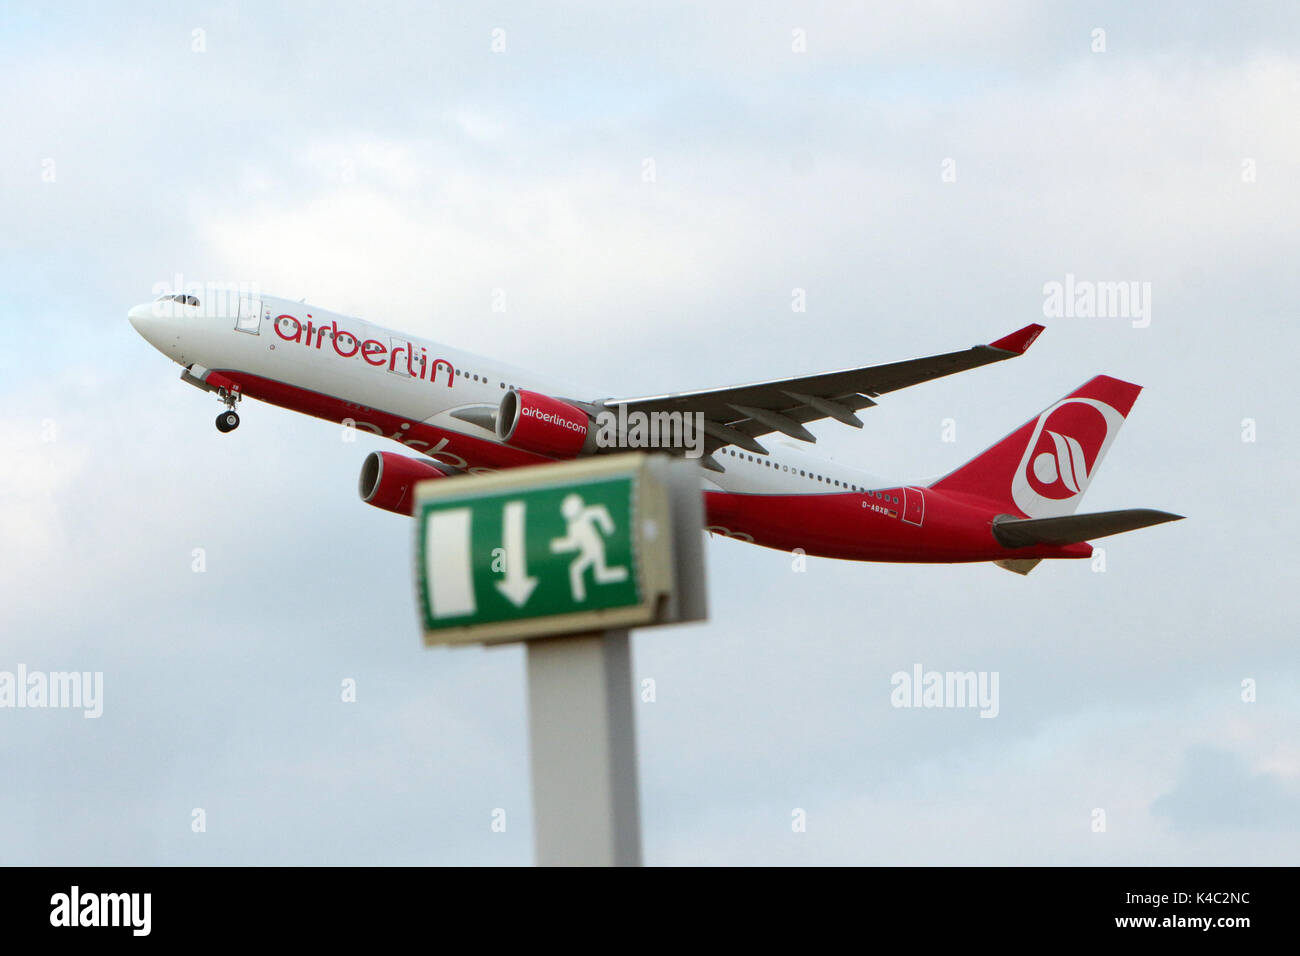 Crisis At Airberlin Airbus A330 With Emergency Exit Sign At Airport Duesseldorf Stock Photo